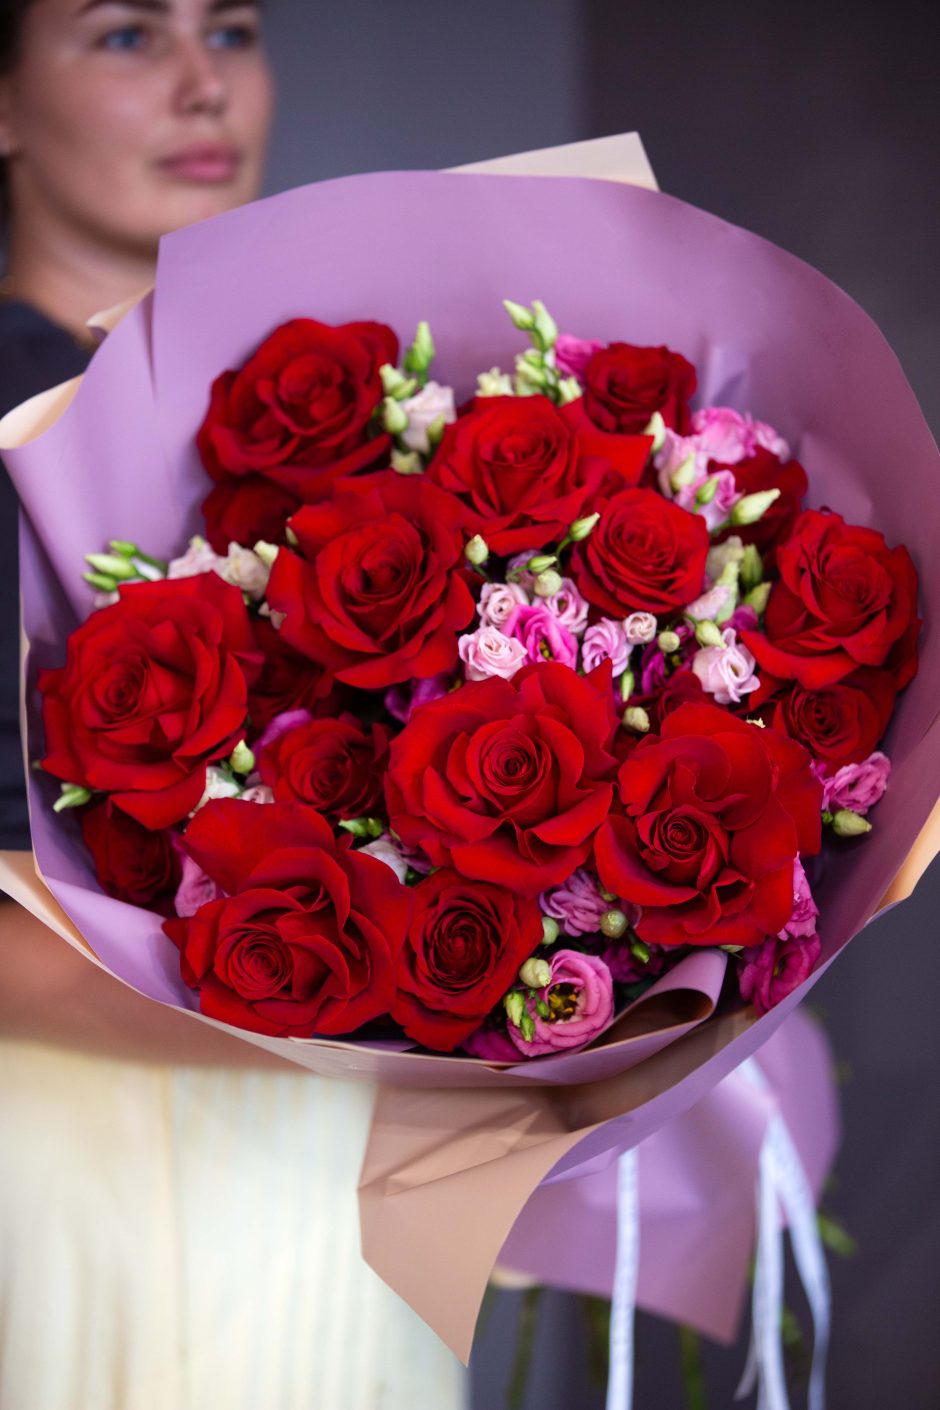 Red Long Stem Roses Bouquet, Red - 2 dozen red long stem roses with lisianthus